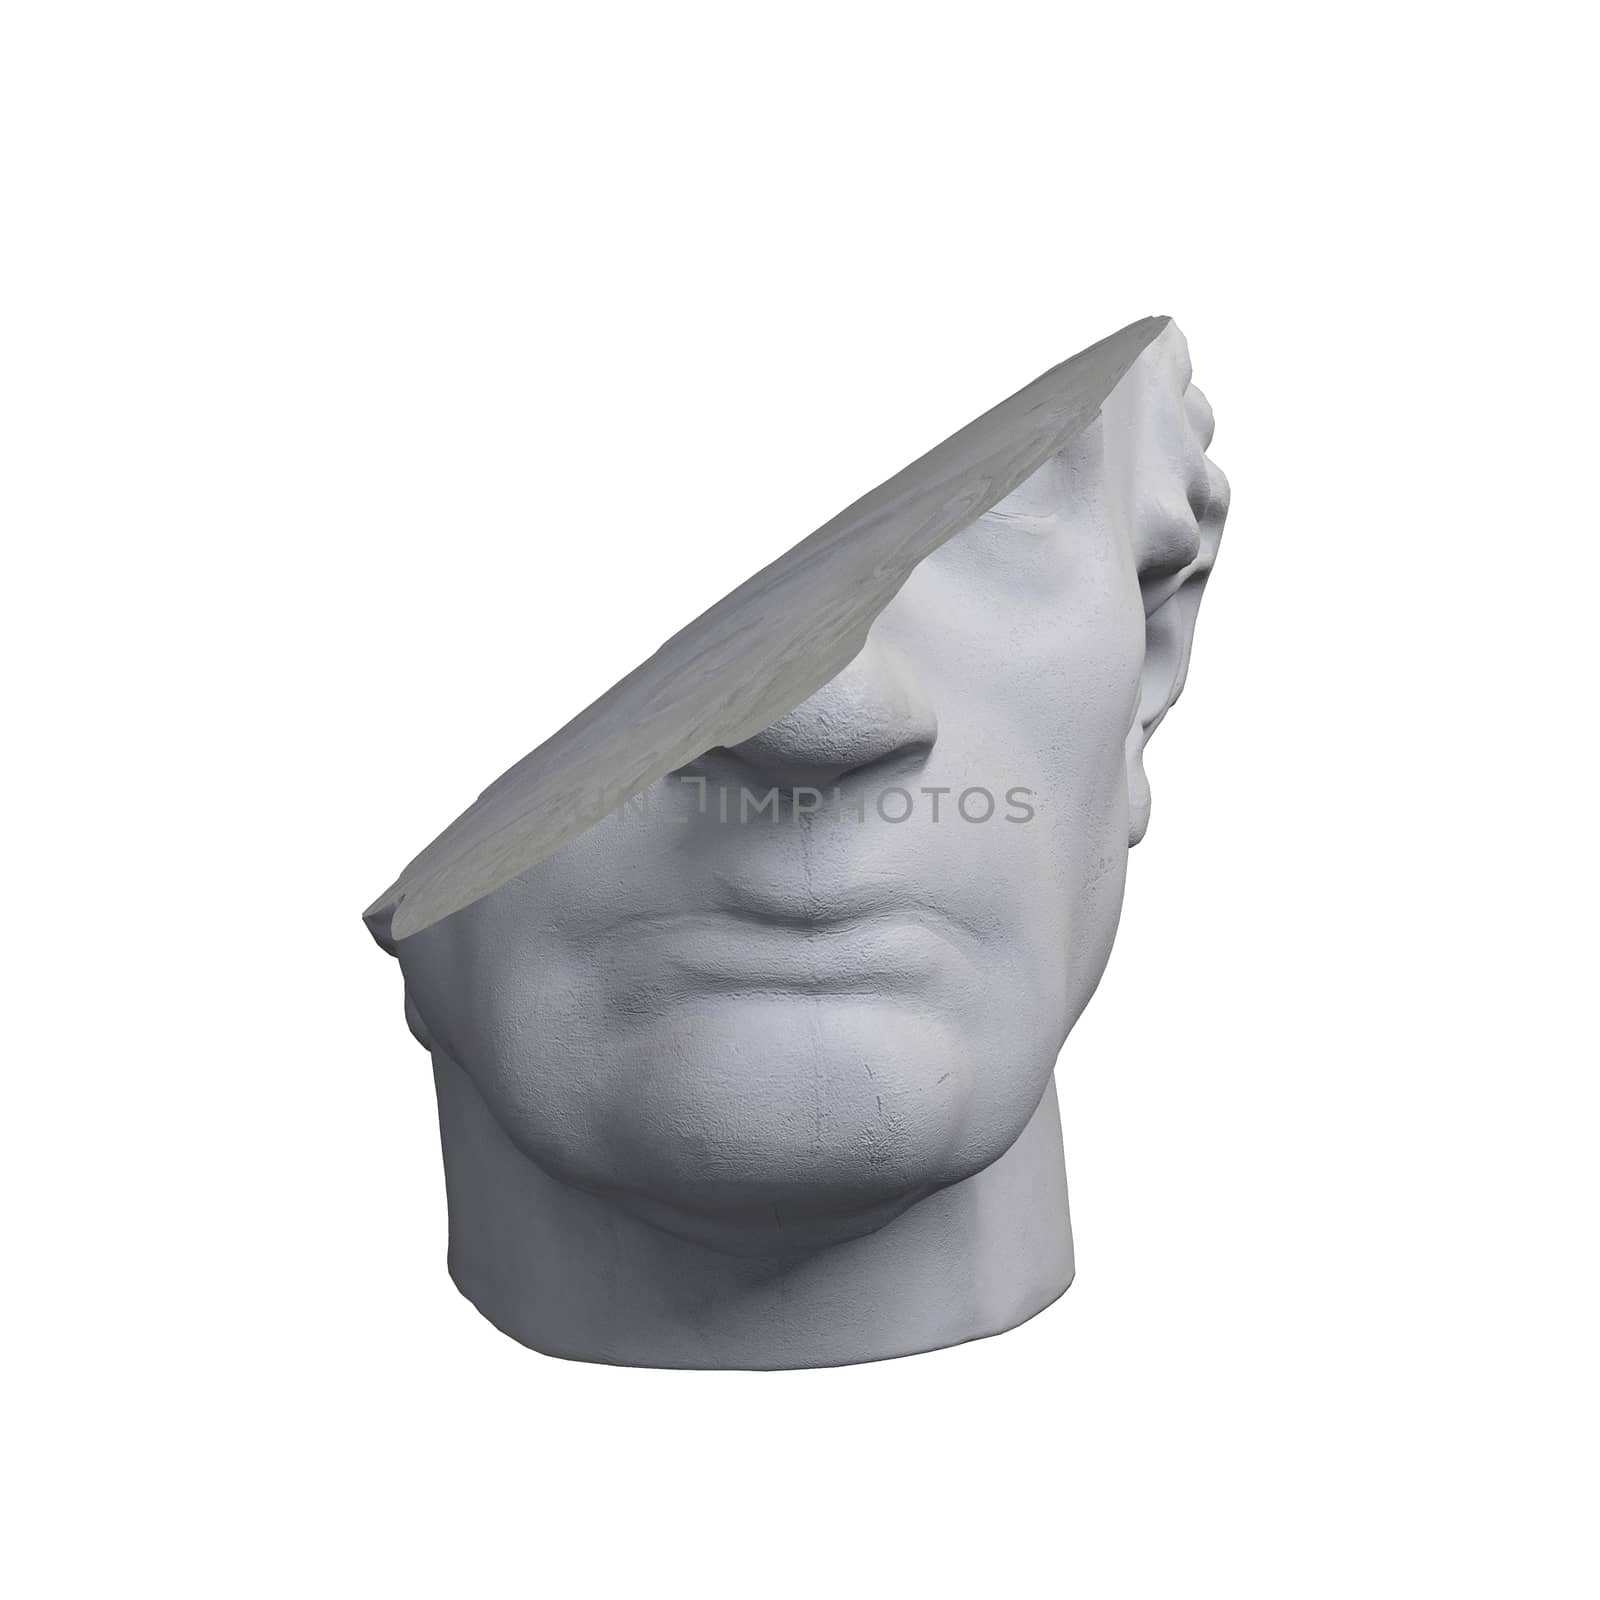 Fragment of colossal head sculpture of classical style in monochromatic grey tones isolated on white background. 3D rendering illustration